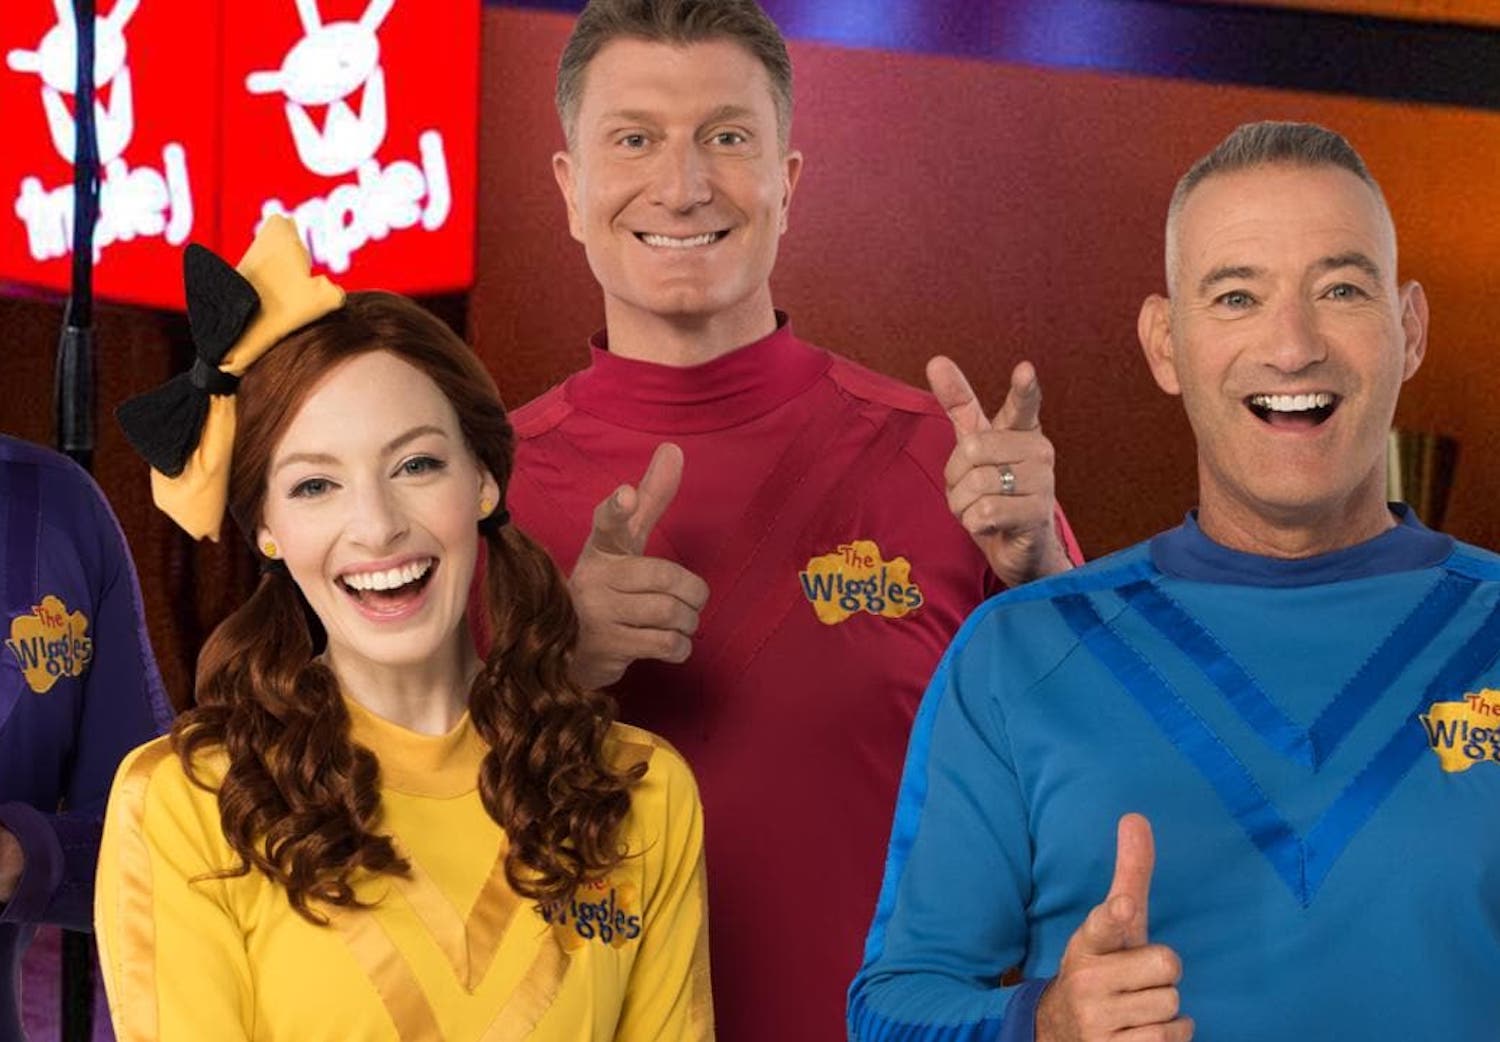 The Wiggles Just Magically Covered Tame Impala For Triple J’s ‘Like A Version’